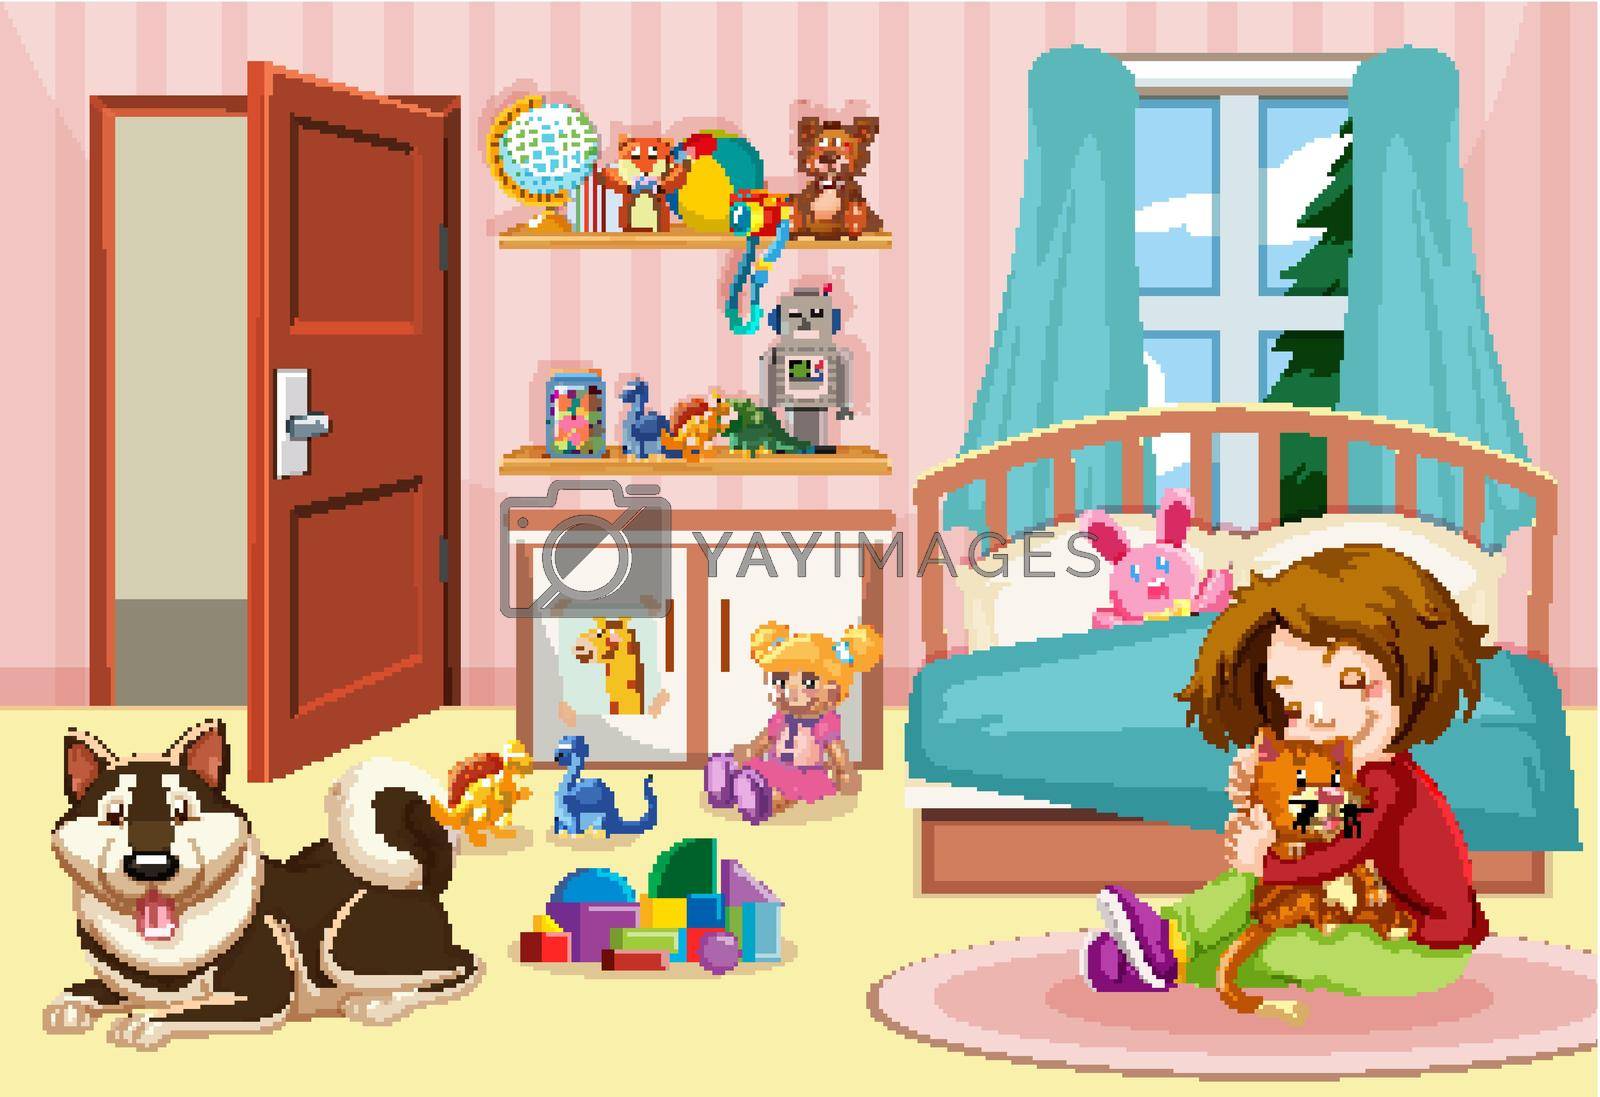 Girl and pets in bedroom illustration